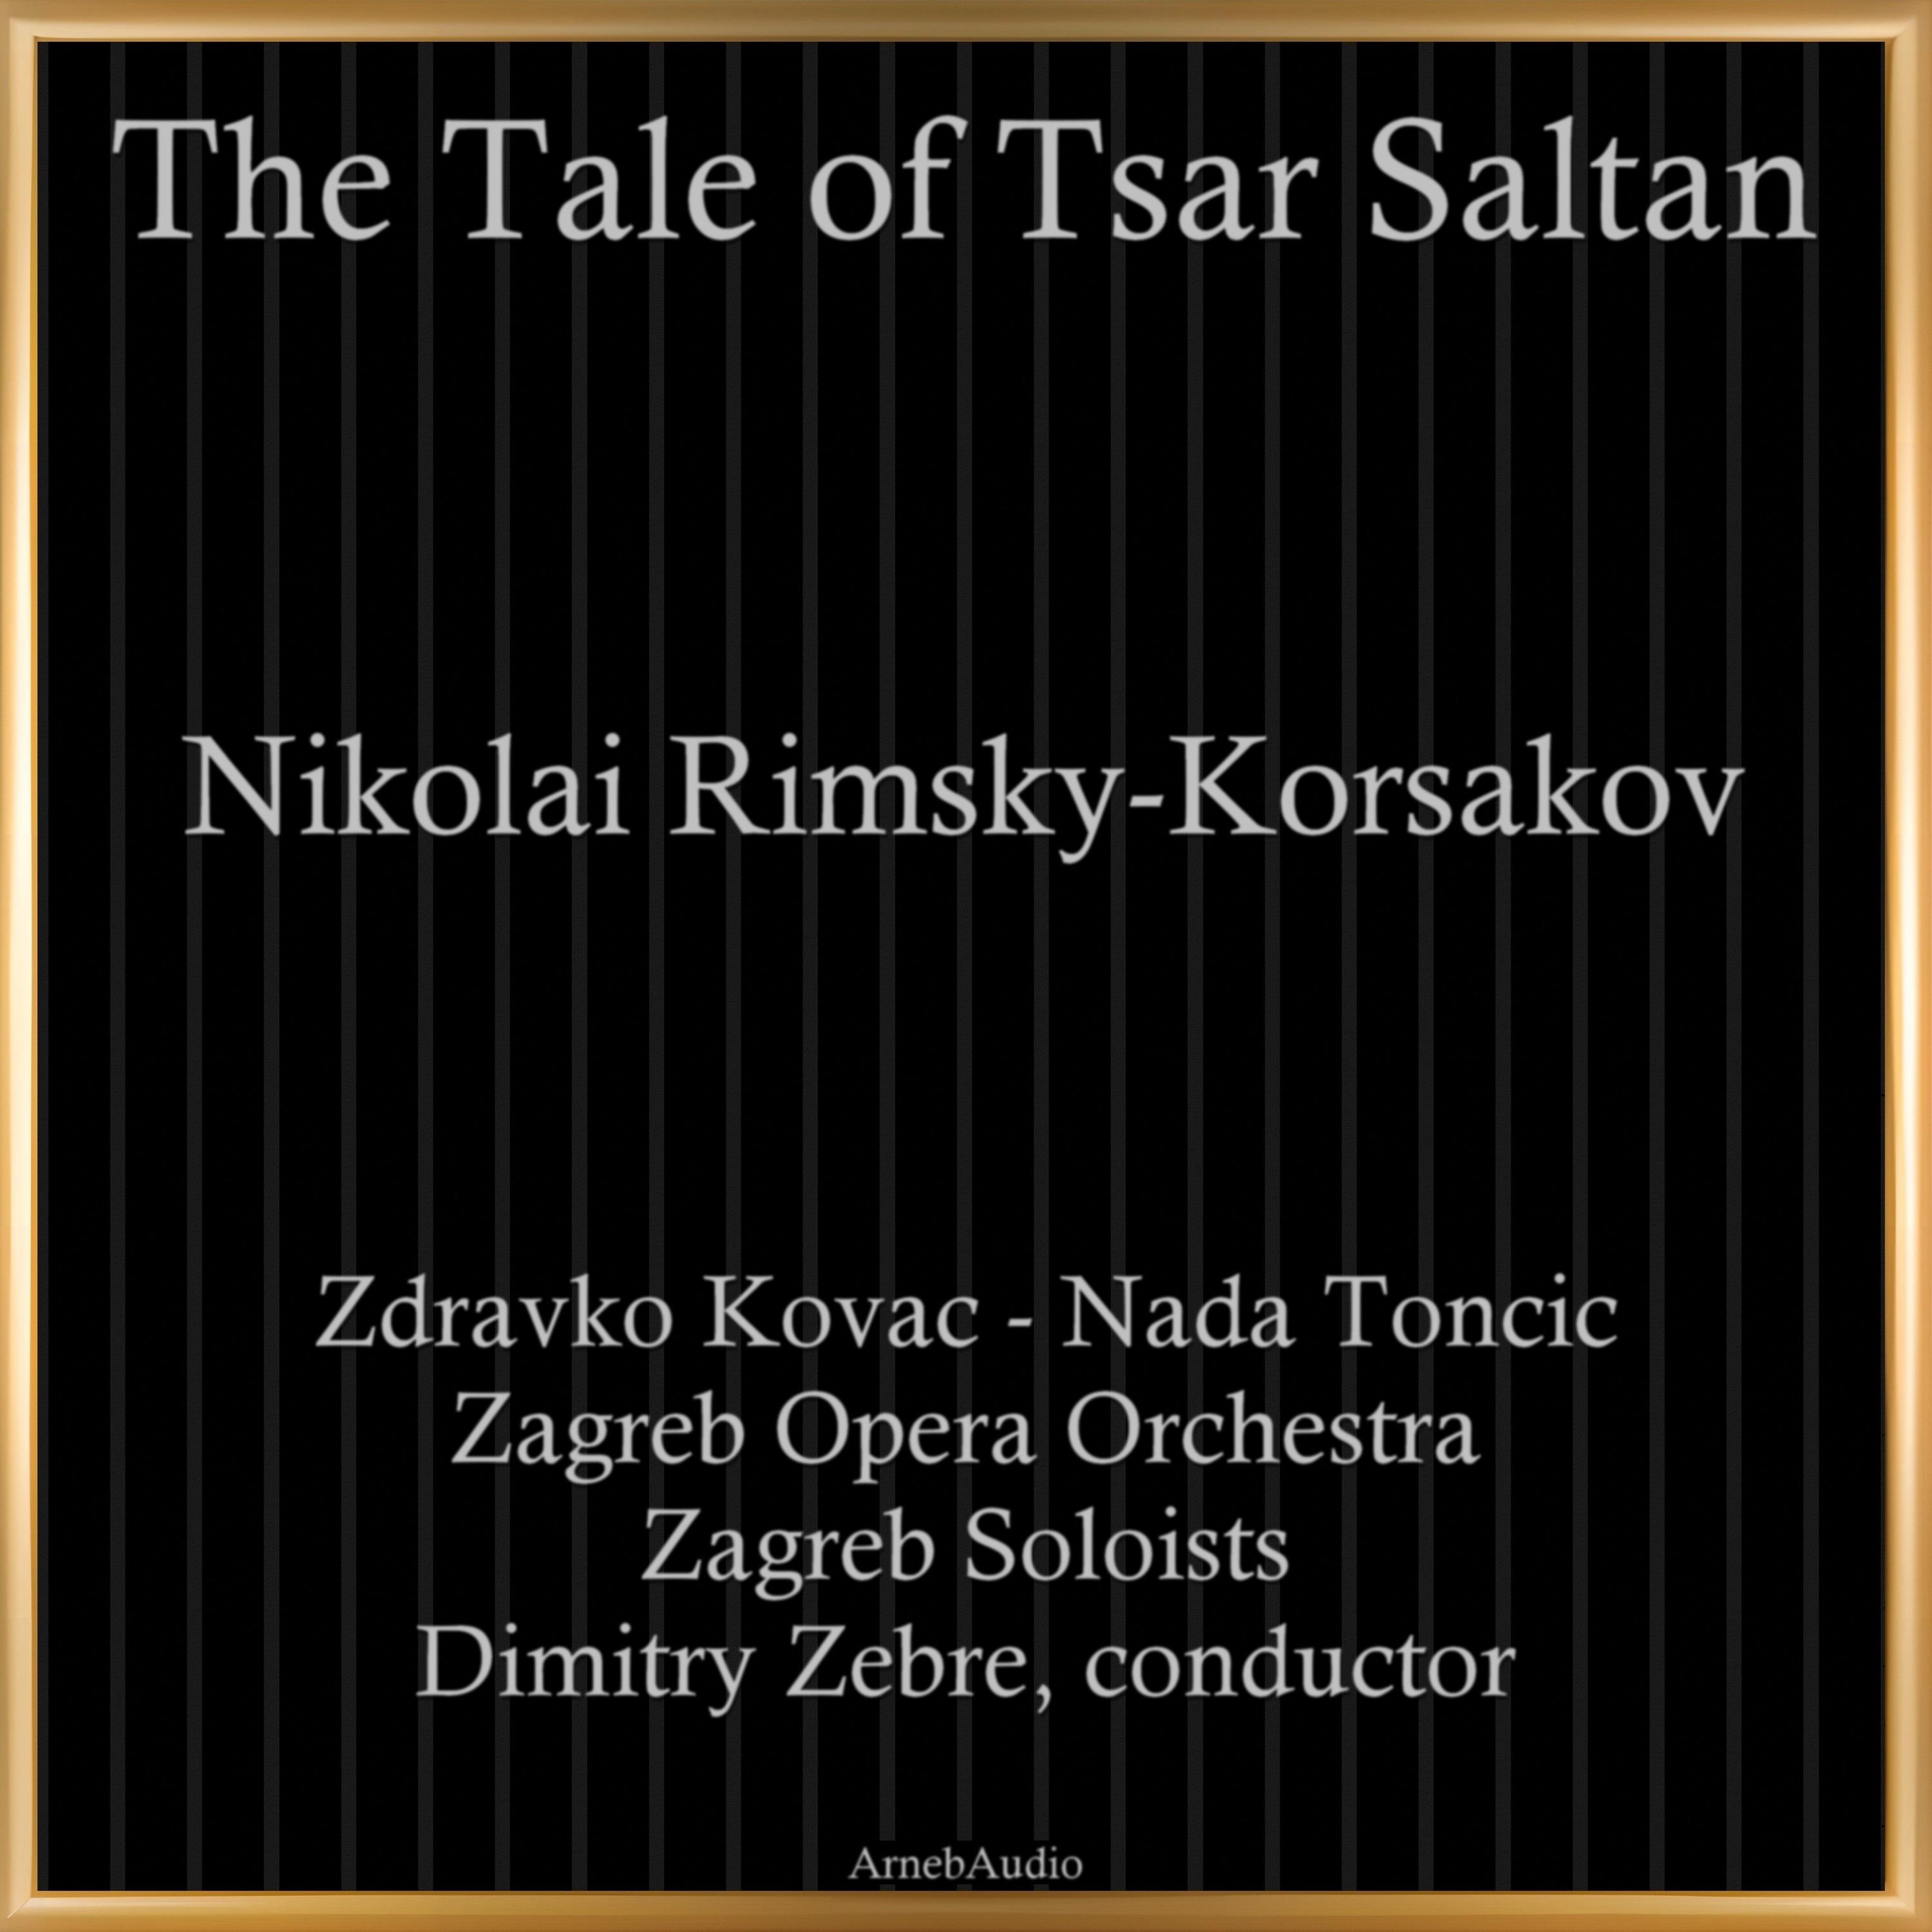 Zagreb Opera Orchestra - The Tale of Tsar Saltan, INR 79, Act III: